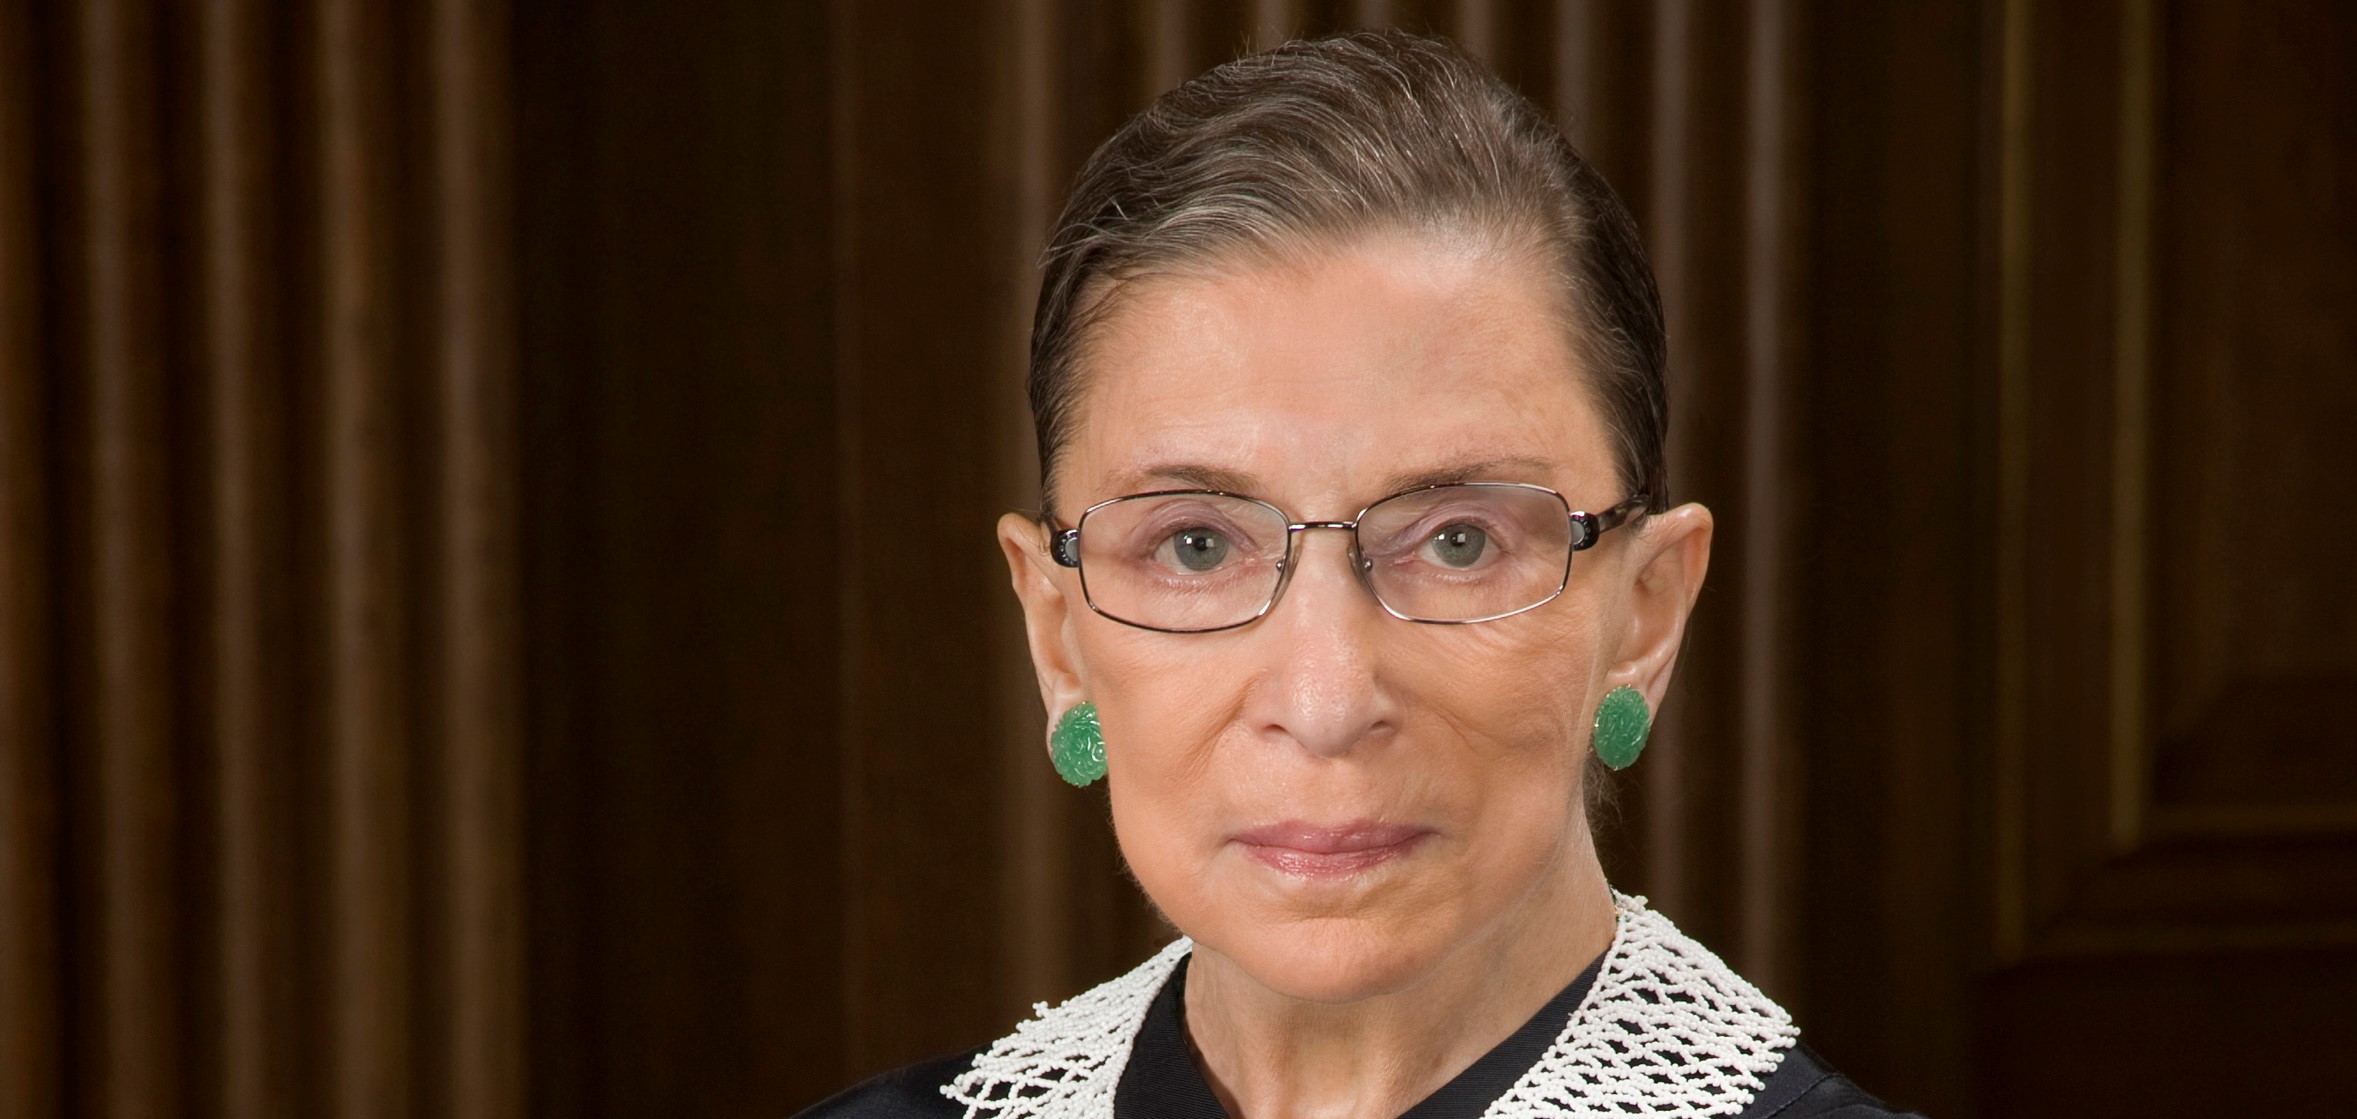 US Supreme Court Justice Ruth Bader Ginsburg has died